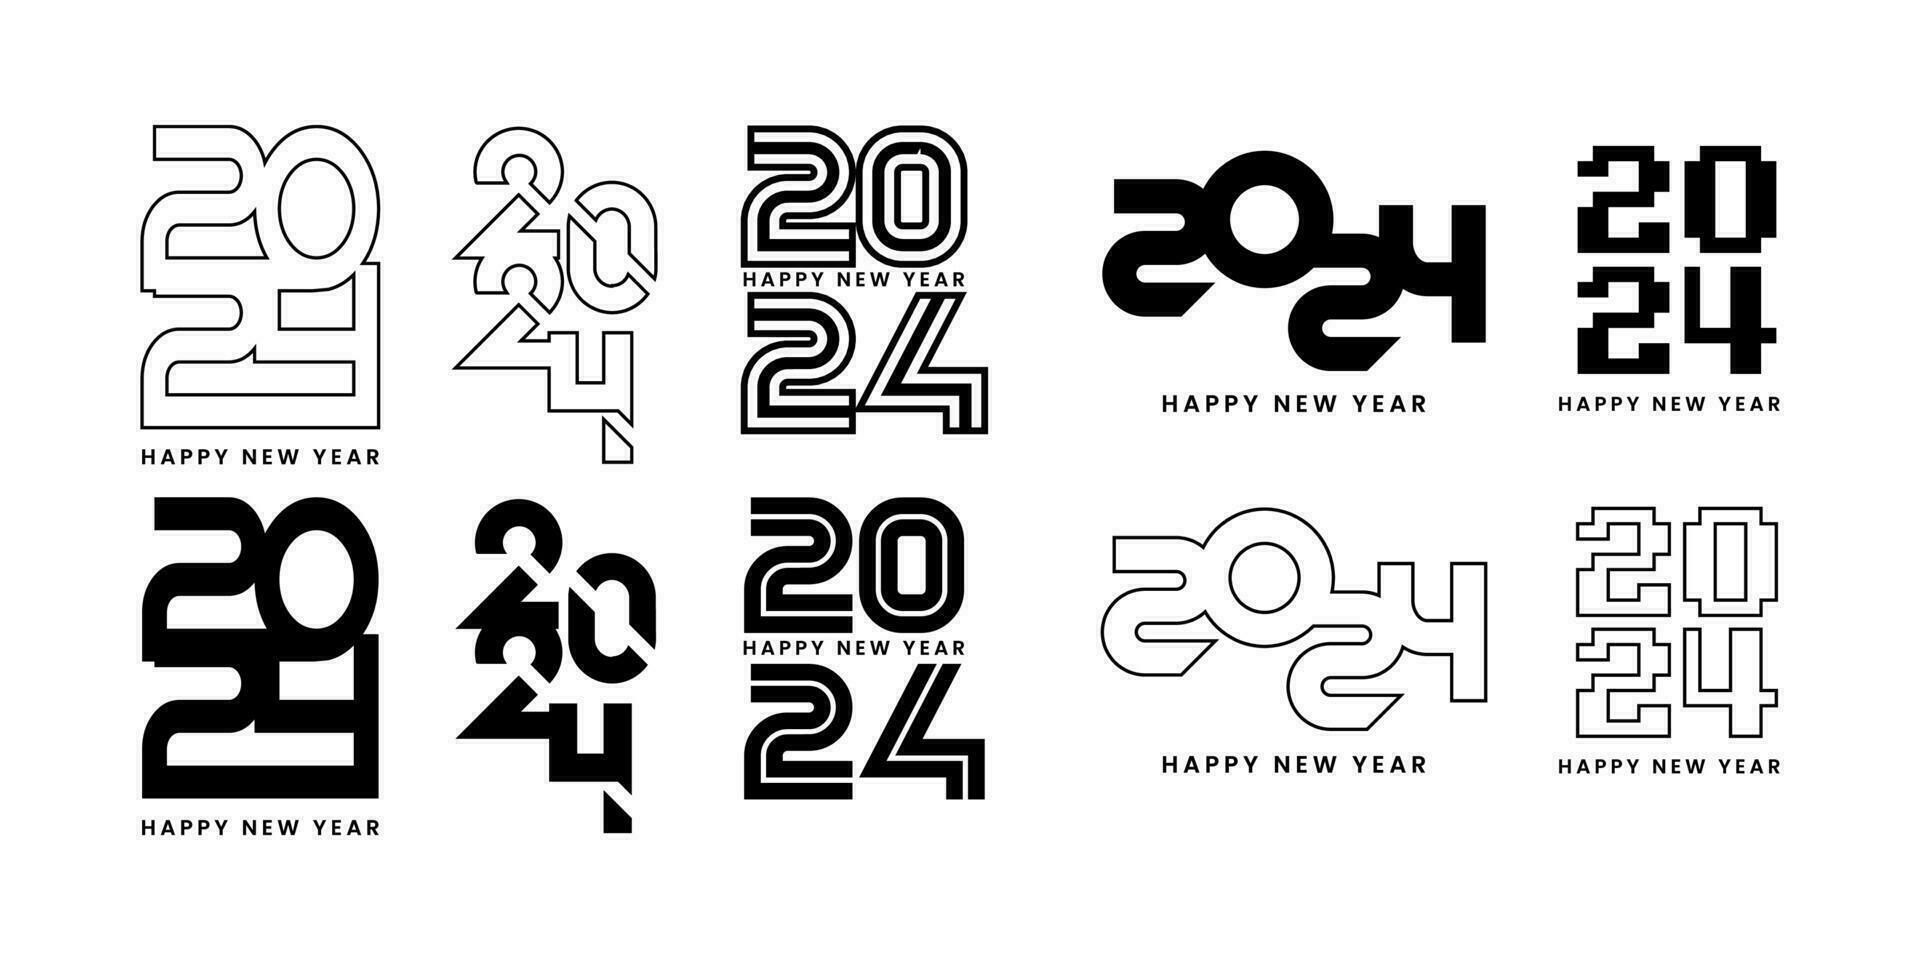 Set of 2024 Happy New Year logo text design template. Christmas symbols 2024 Happy New Year. Vector illustration with black labels logo for diaries, notebooks, calendars.